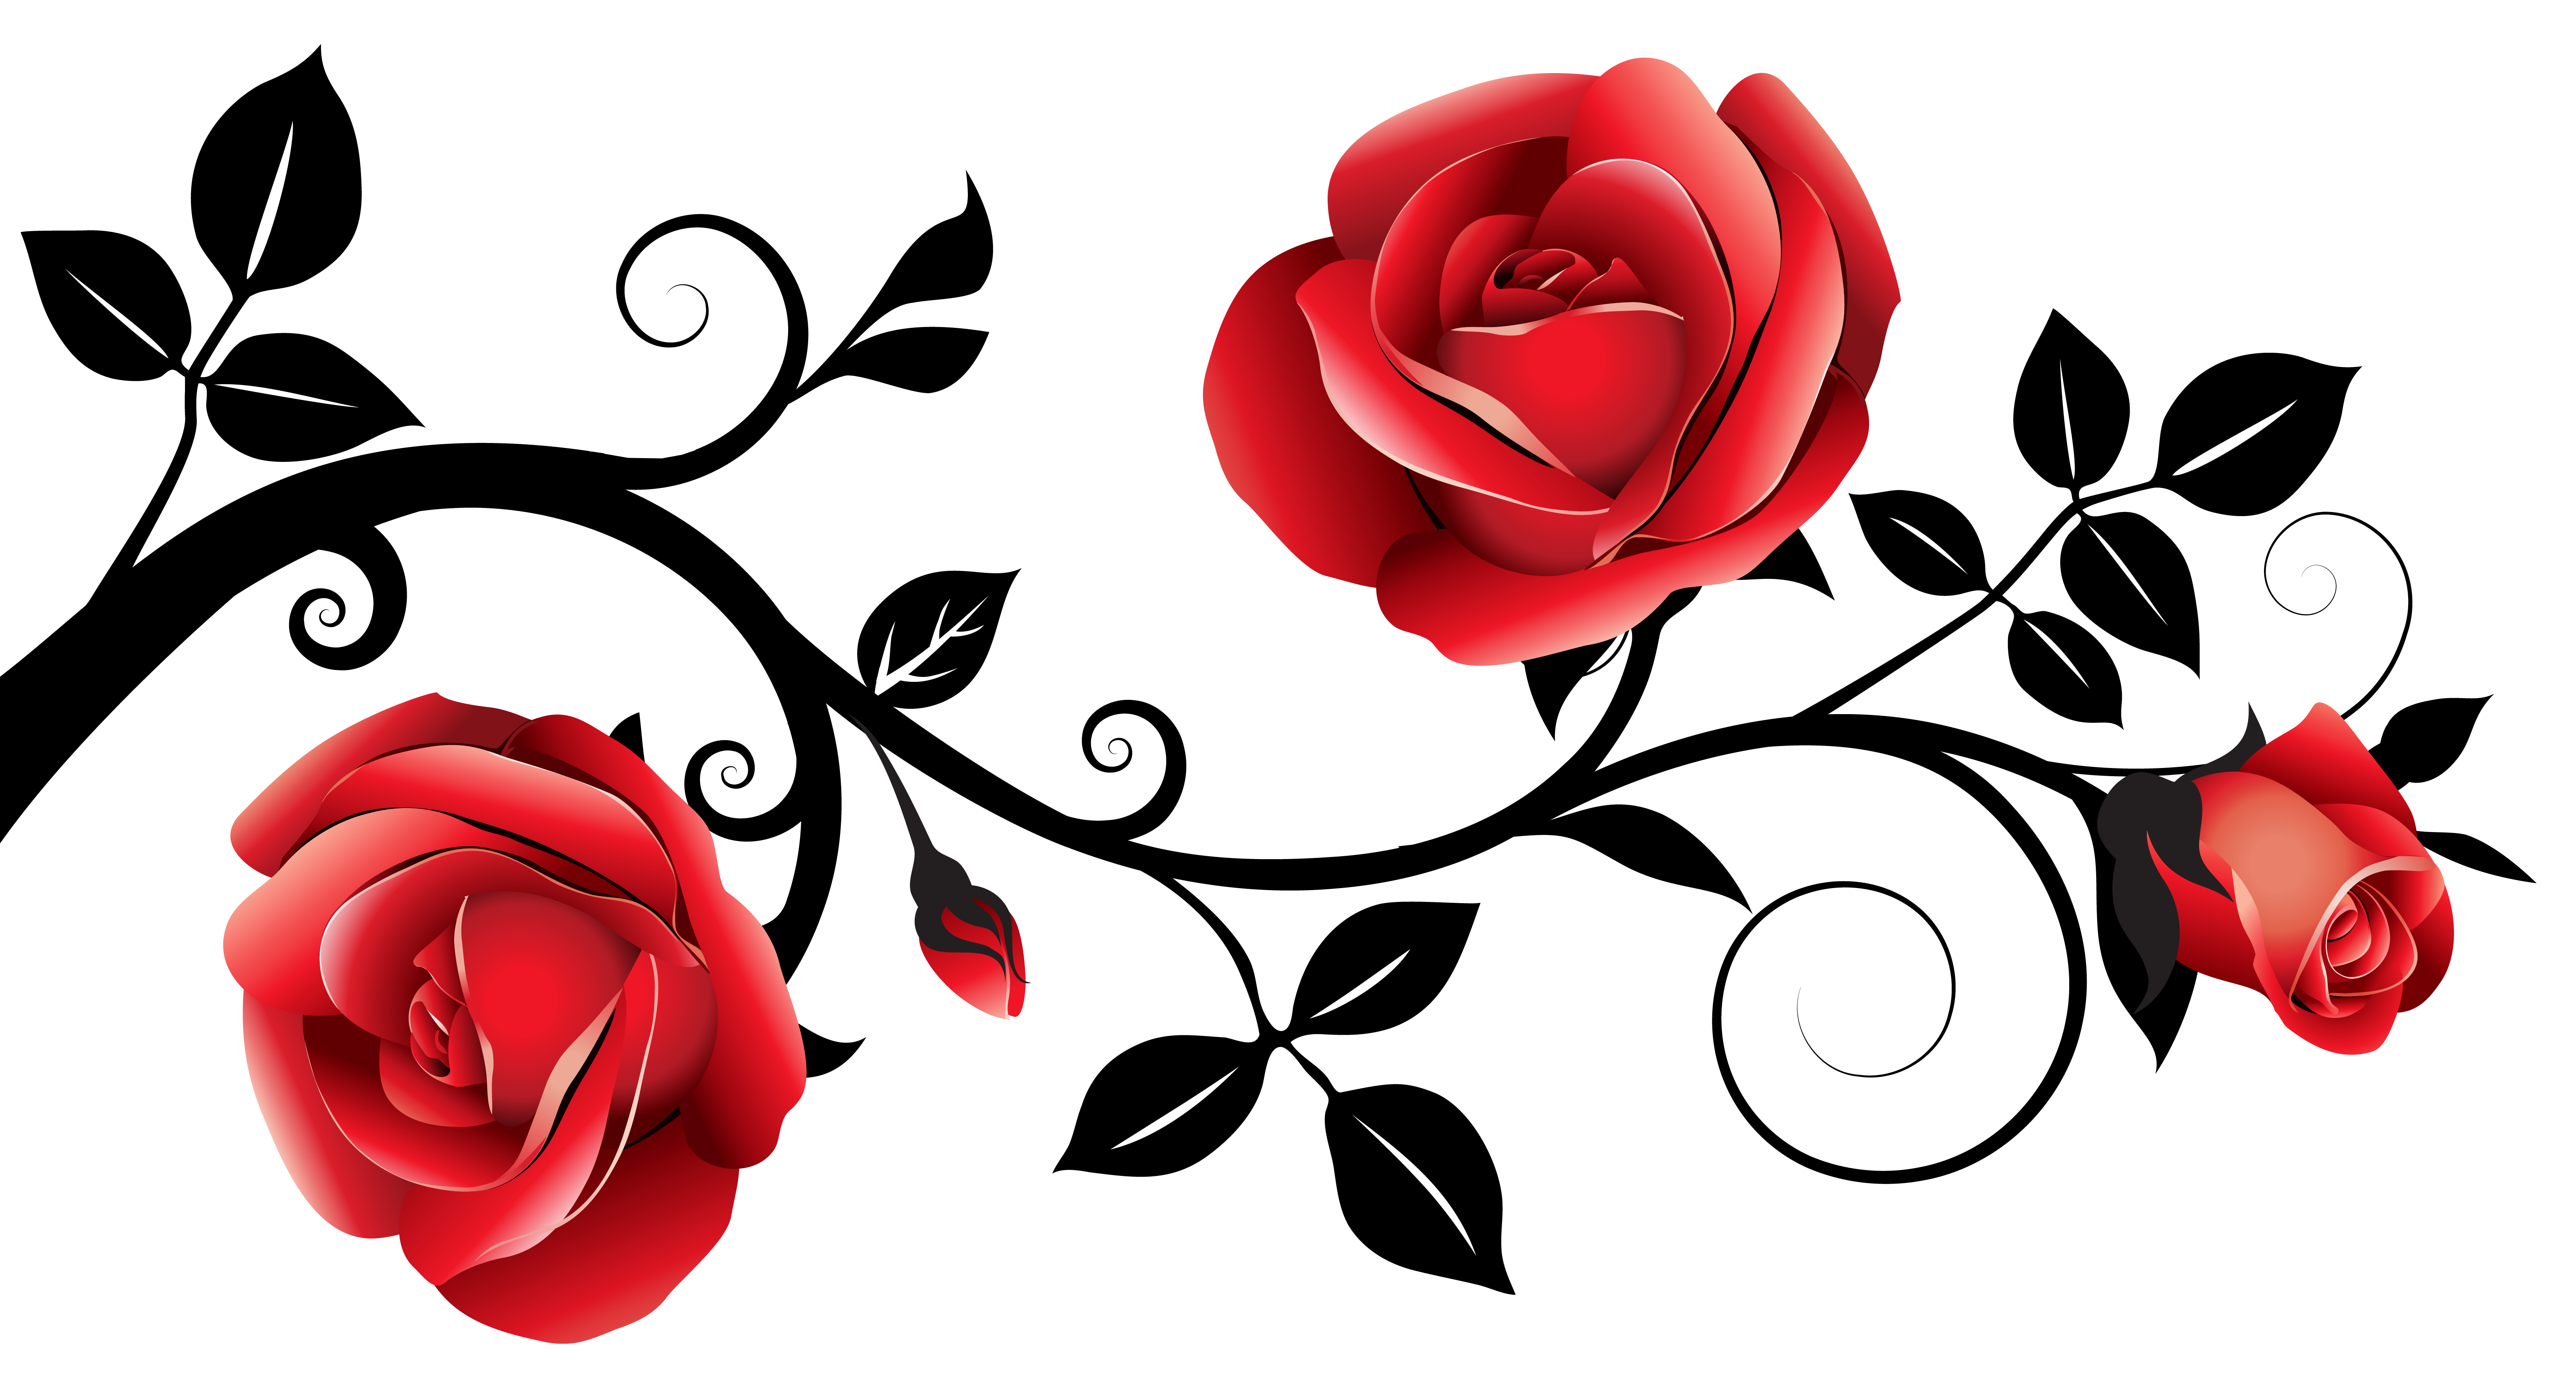 Clipart rose easy. Red and black decorative